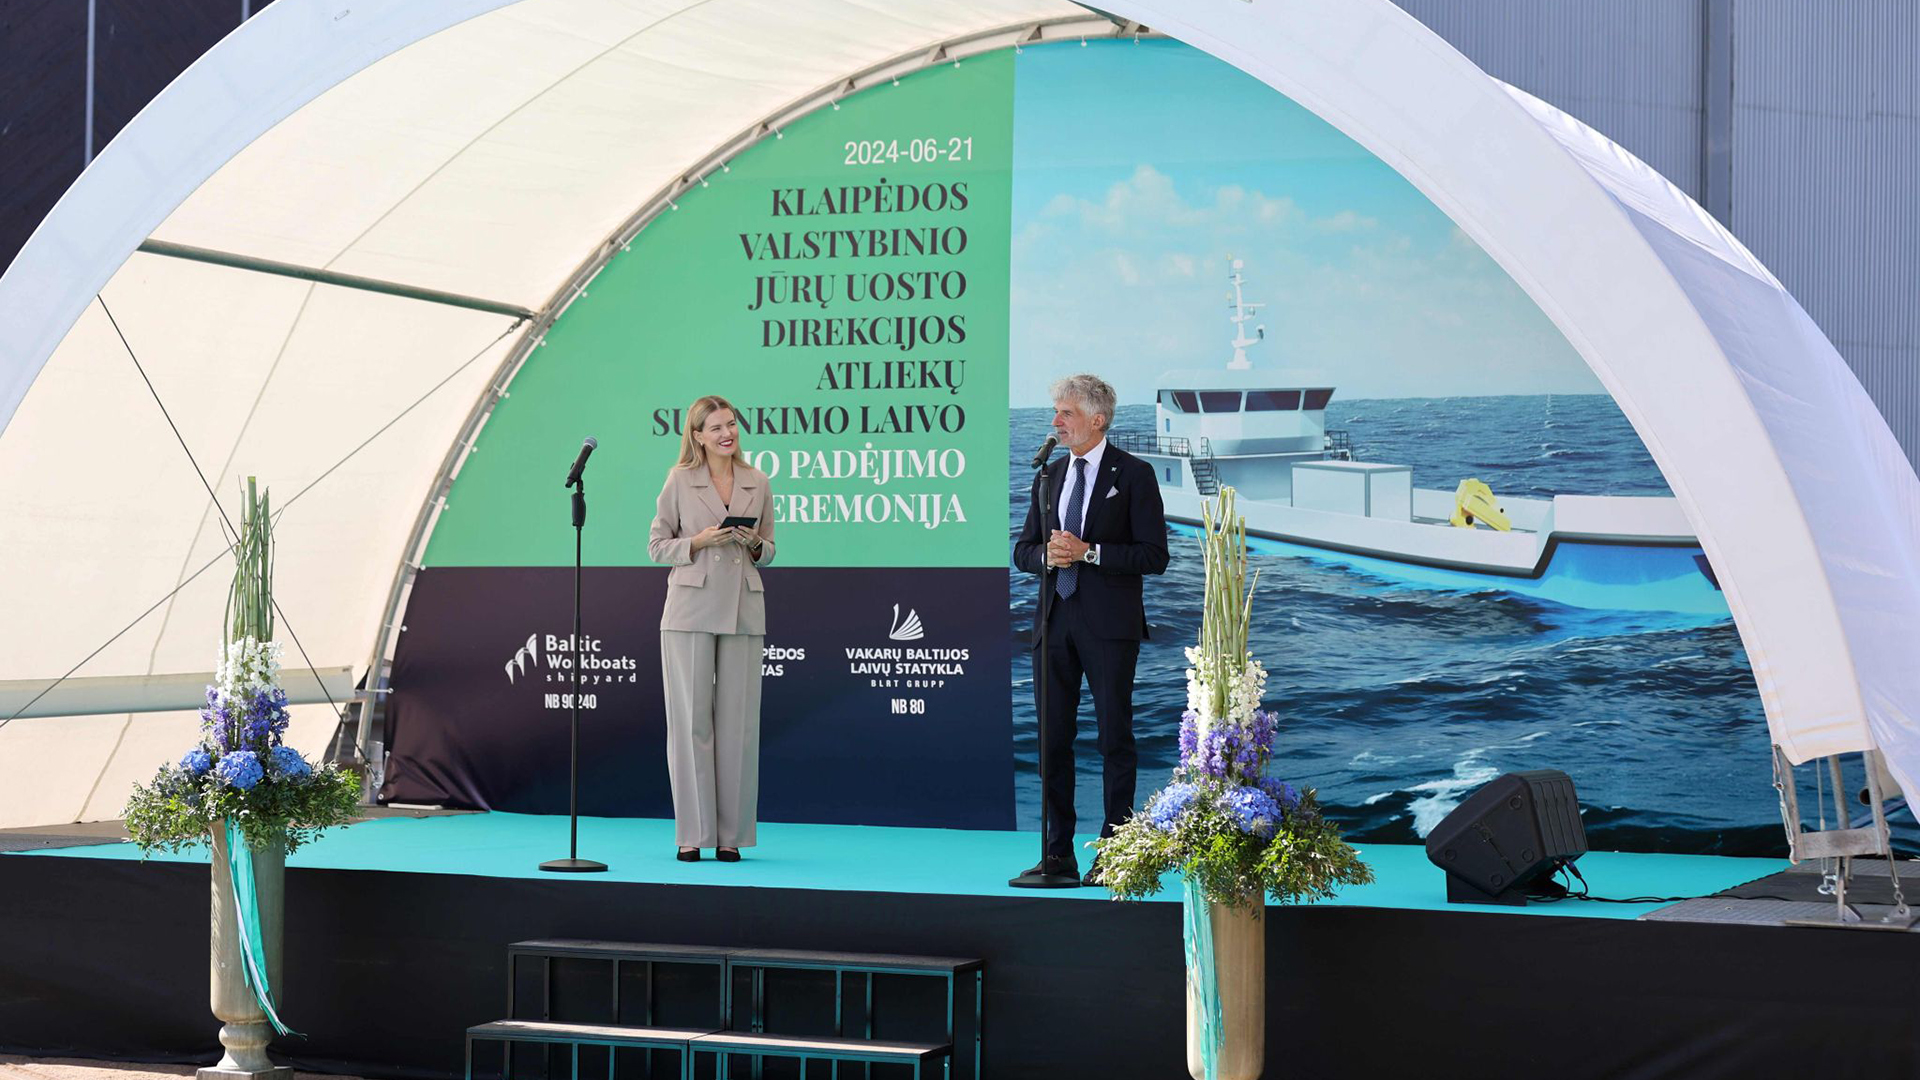 Boat launch press conference at BLRT Grupp: from left, host of the event and Algis Latakas, CEO of Klaipėda Port